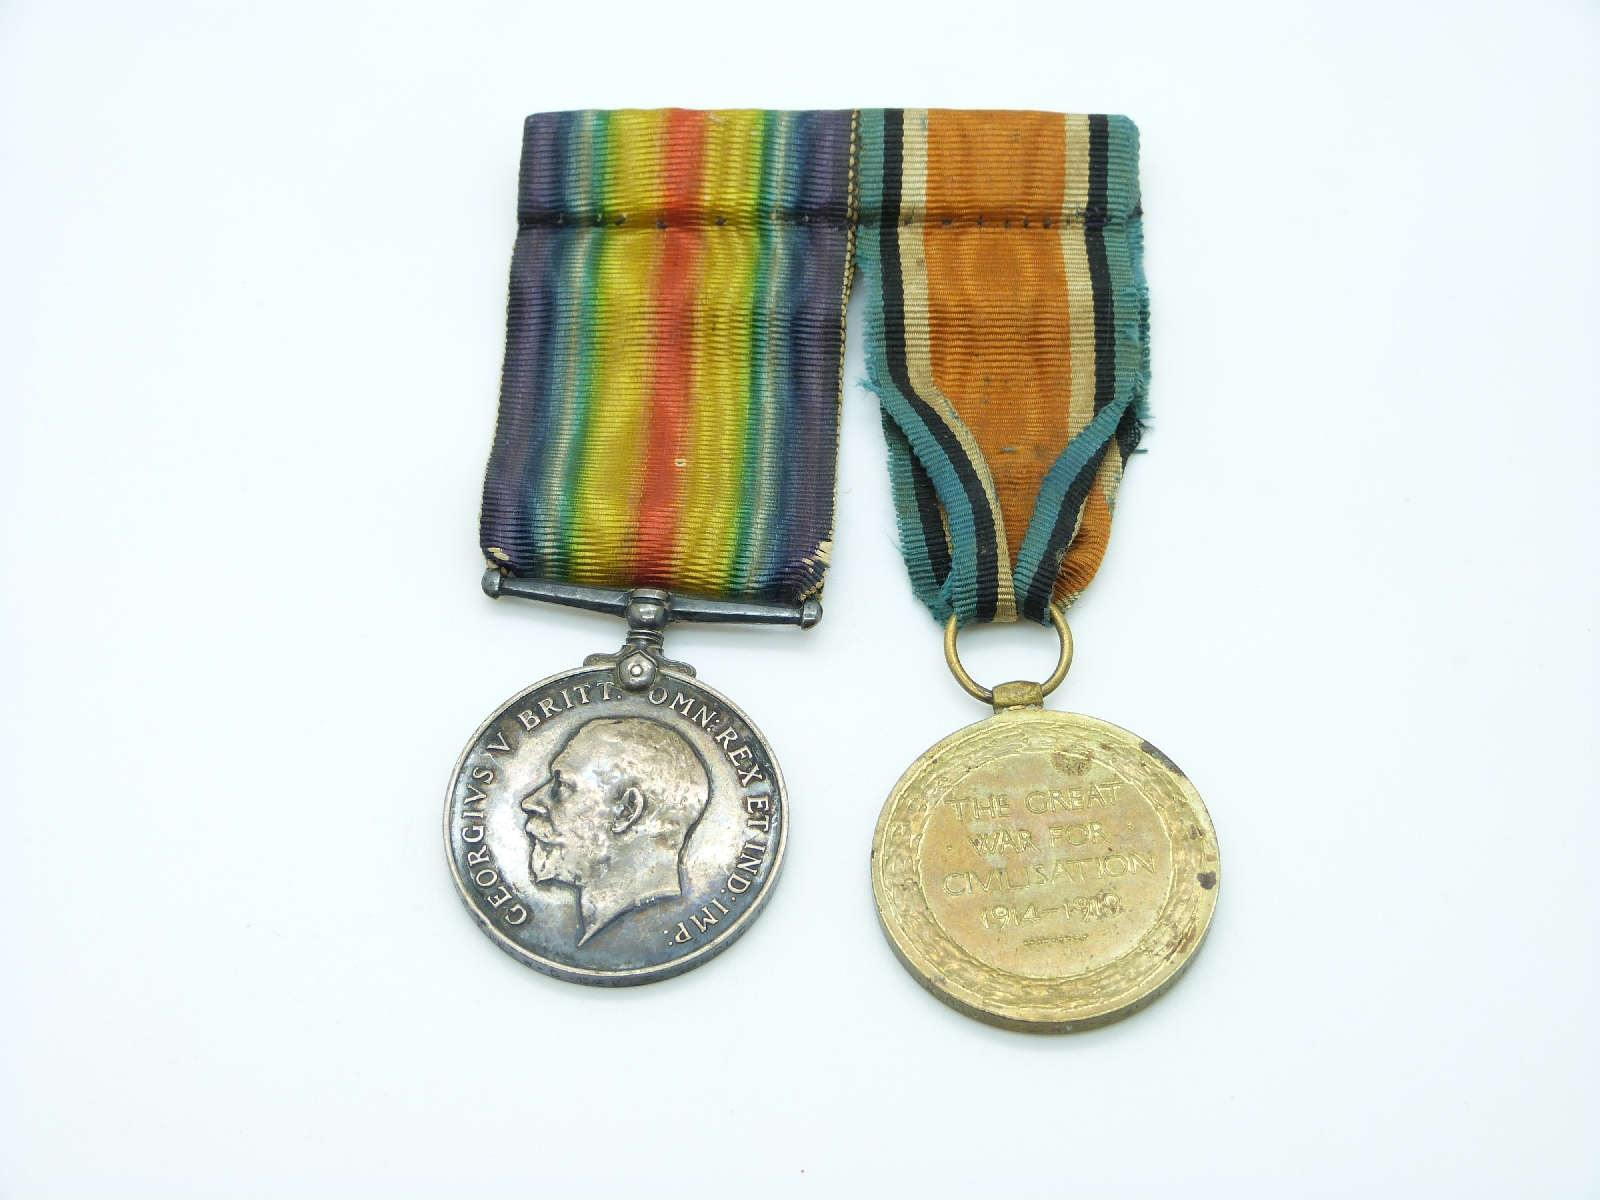 British Army WWI medal pair comprising War Medal and Victory Medal awarded to 52804 Pte. W.G.